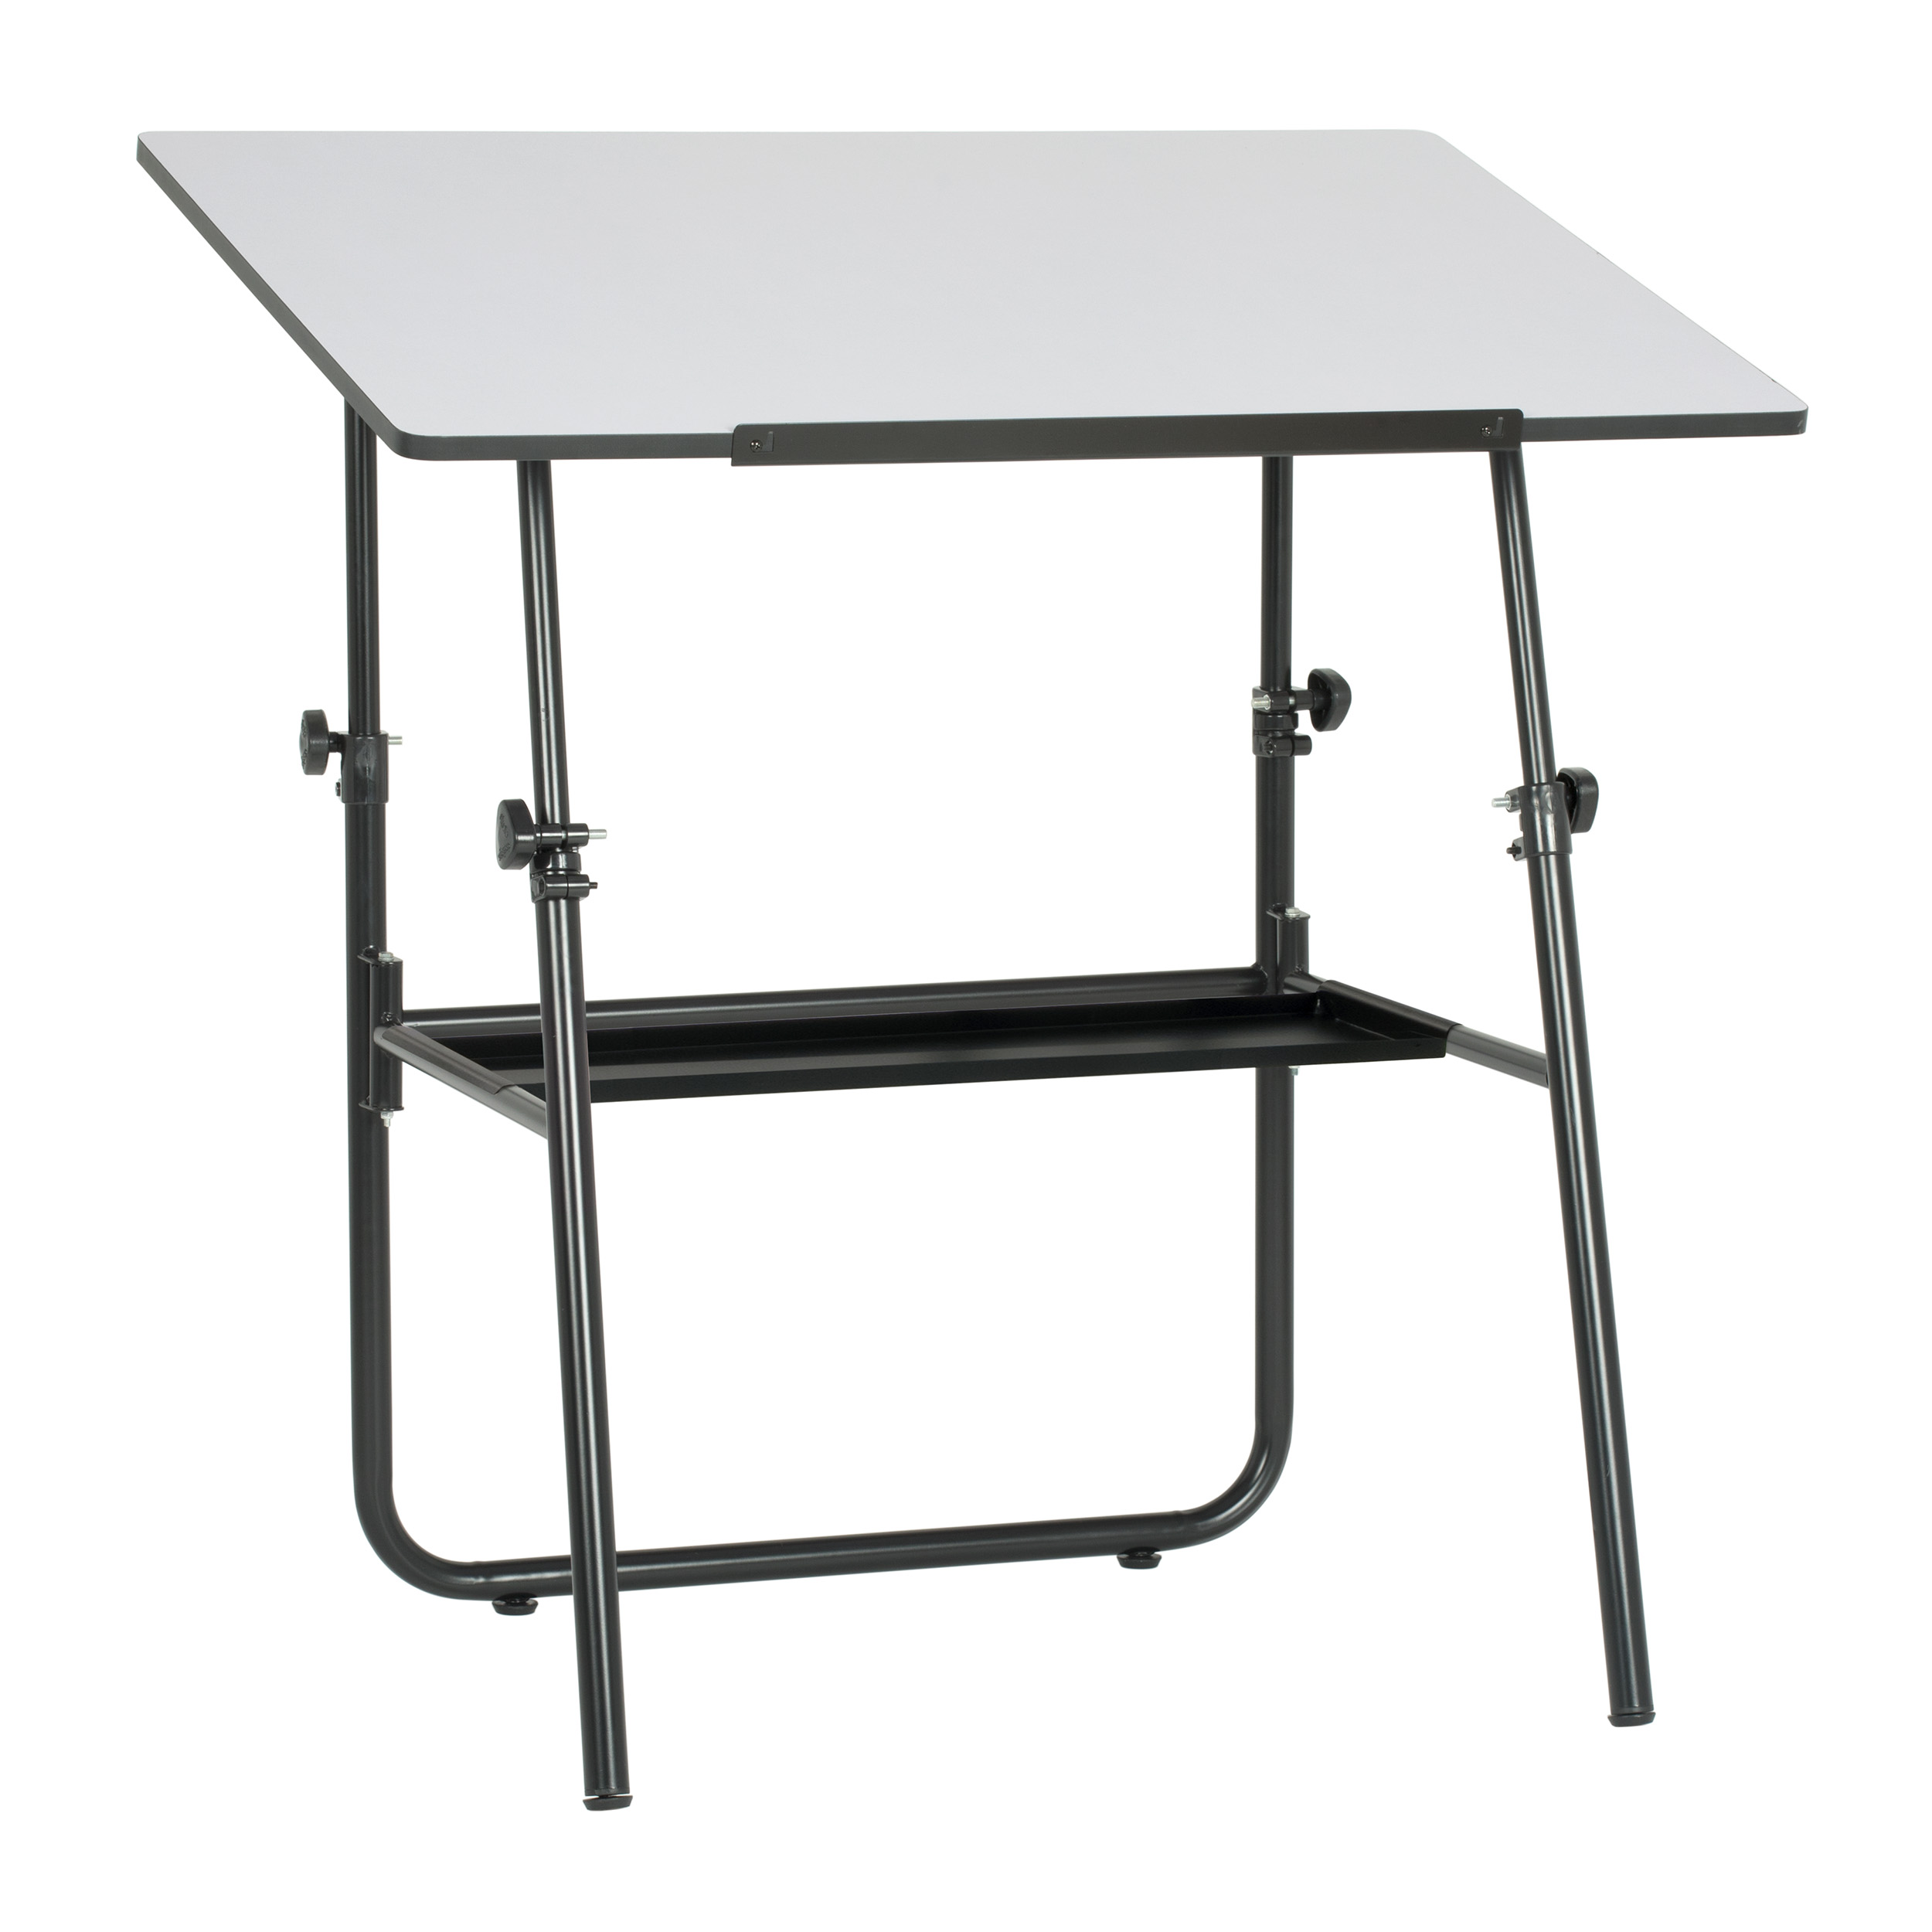 Studio Designs Ultima Drafting Table with Adjustable Fold-A-Way Base and 42"x 30" Top - image 2 of 14